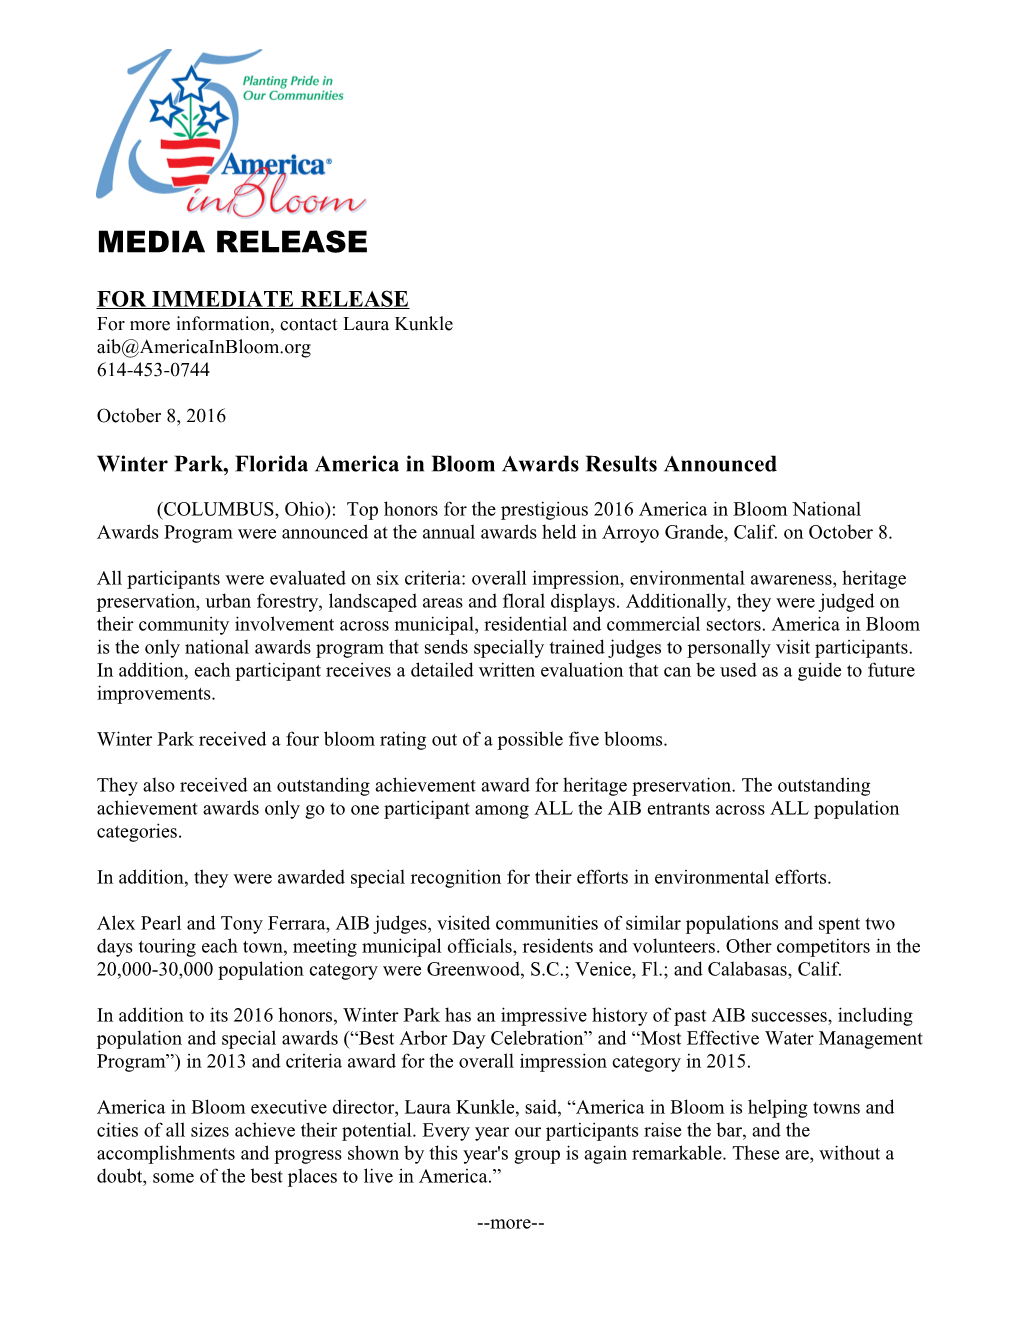 Winter Park, Florida America in Bloom Awards Results Announced